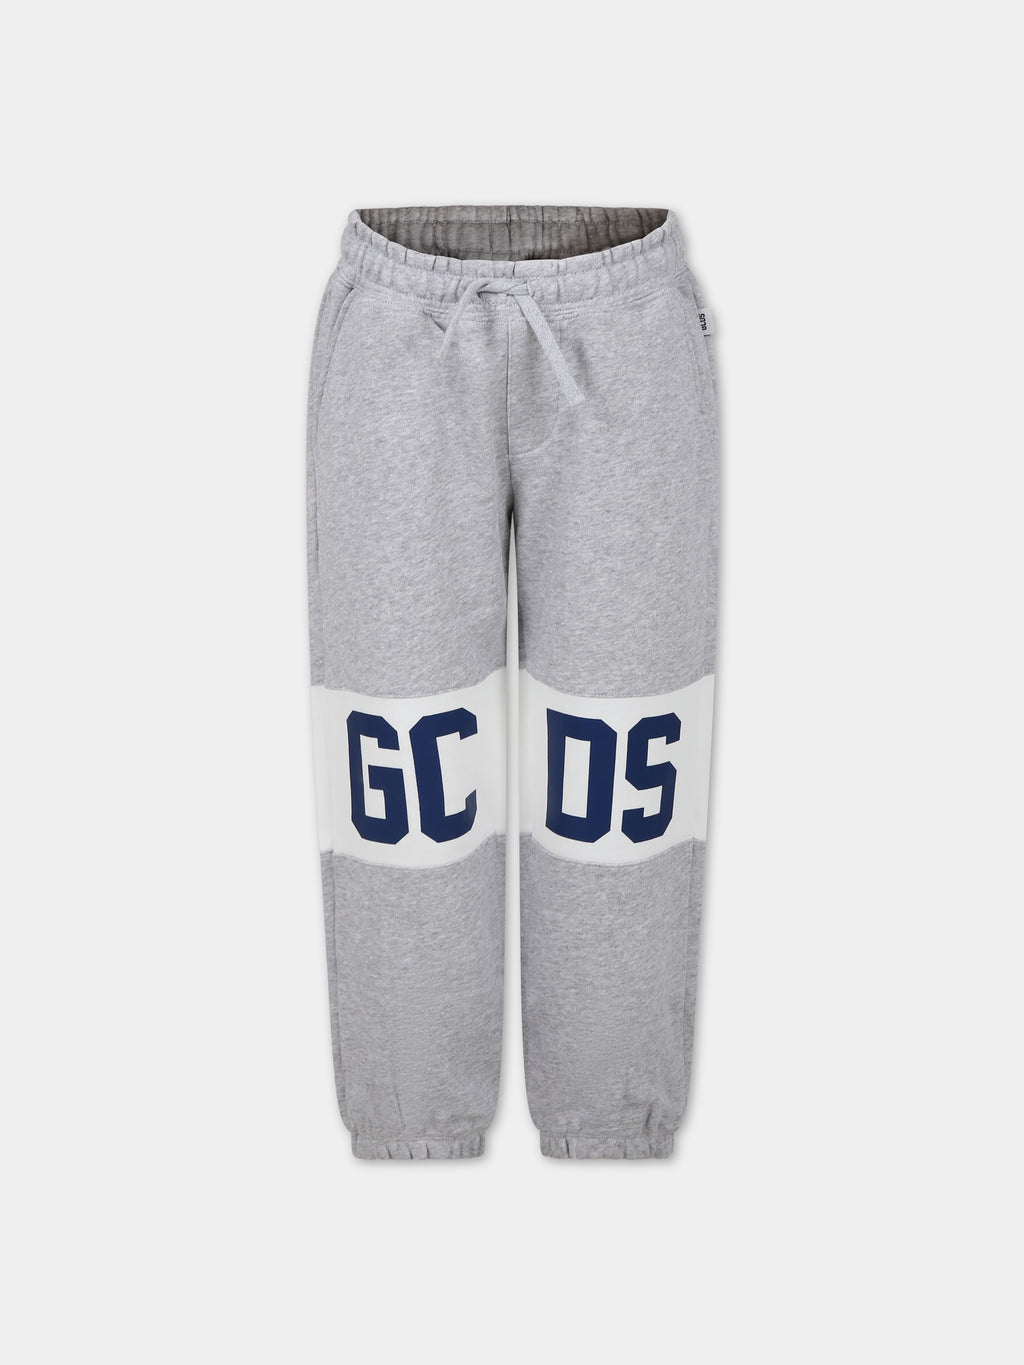 Grey trousers for kids with logo